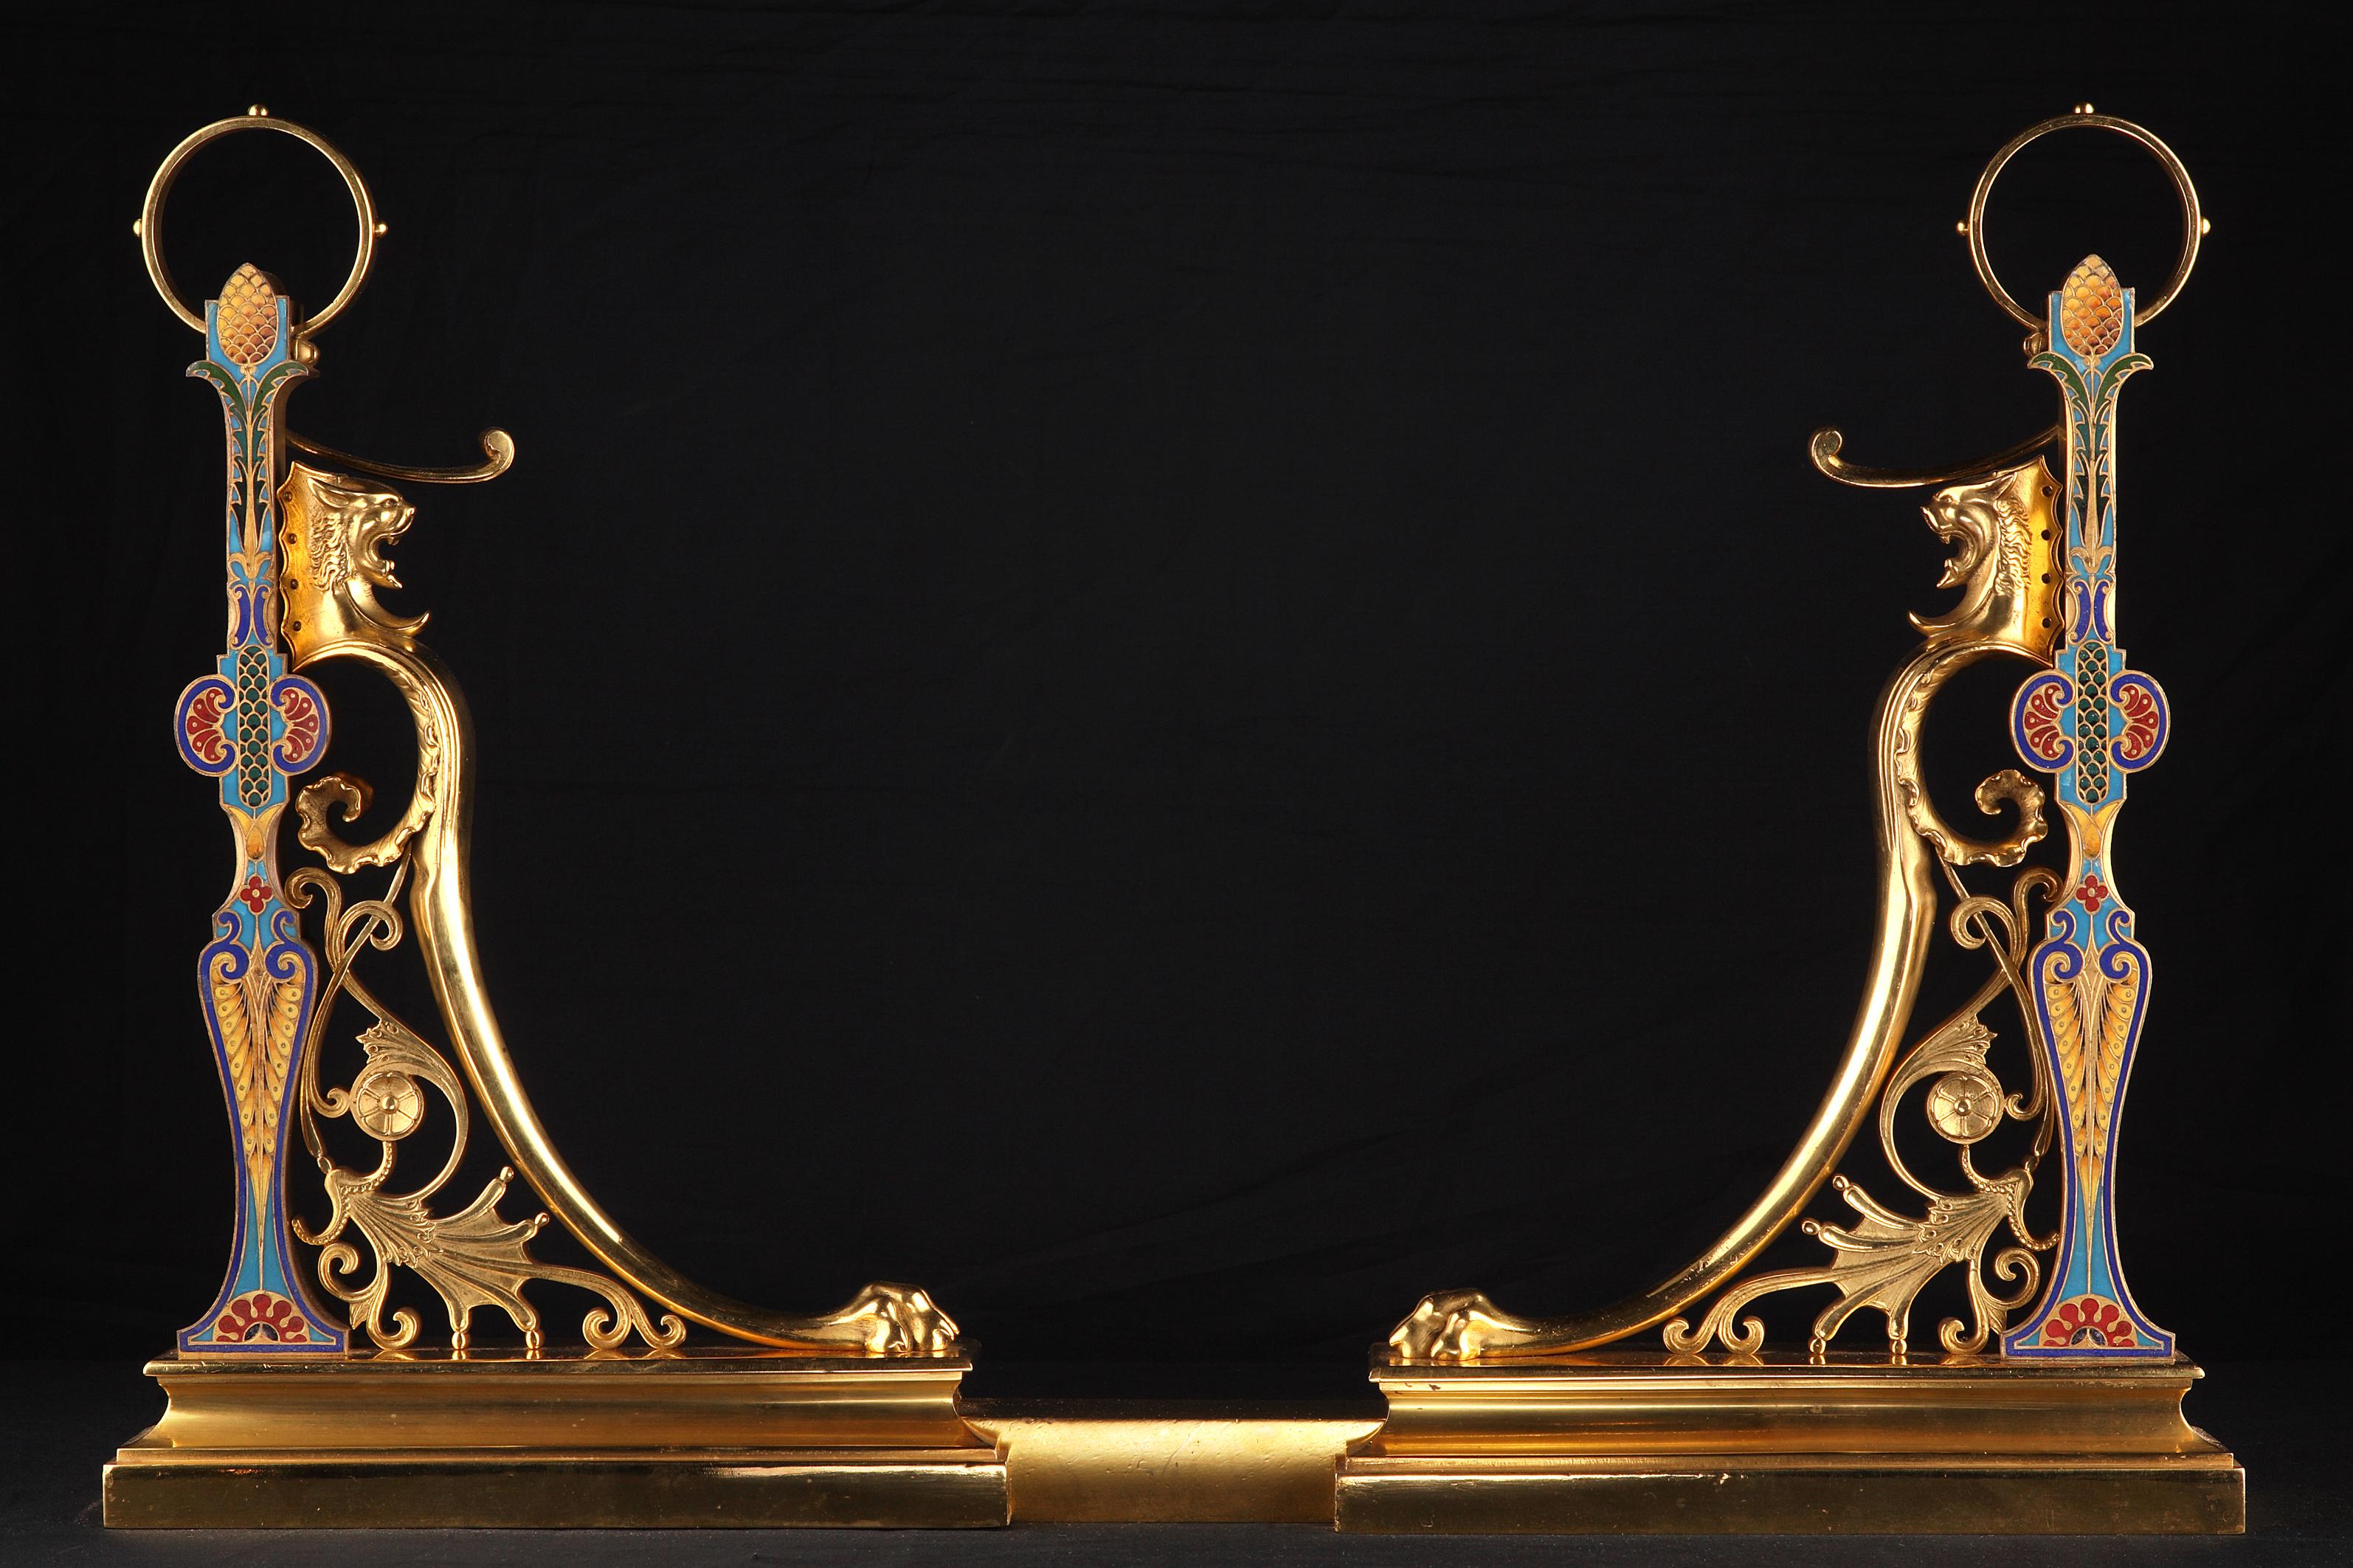 Measures: Height : 47 cm (18,5 in.) ; Width : 70 up to 96 cm (27,5 – 37,8 in.) ; Depth : 6 cm (2,3 in.)

A rare pair of square shaped andirons, made in gilded bronze and polychrome « champlevé » enamel. Designed in the Greek style with